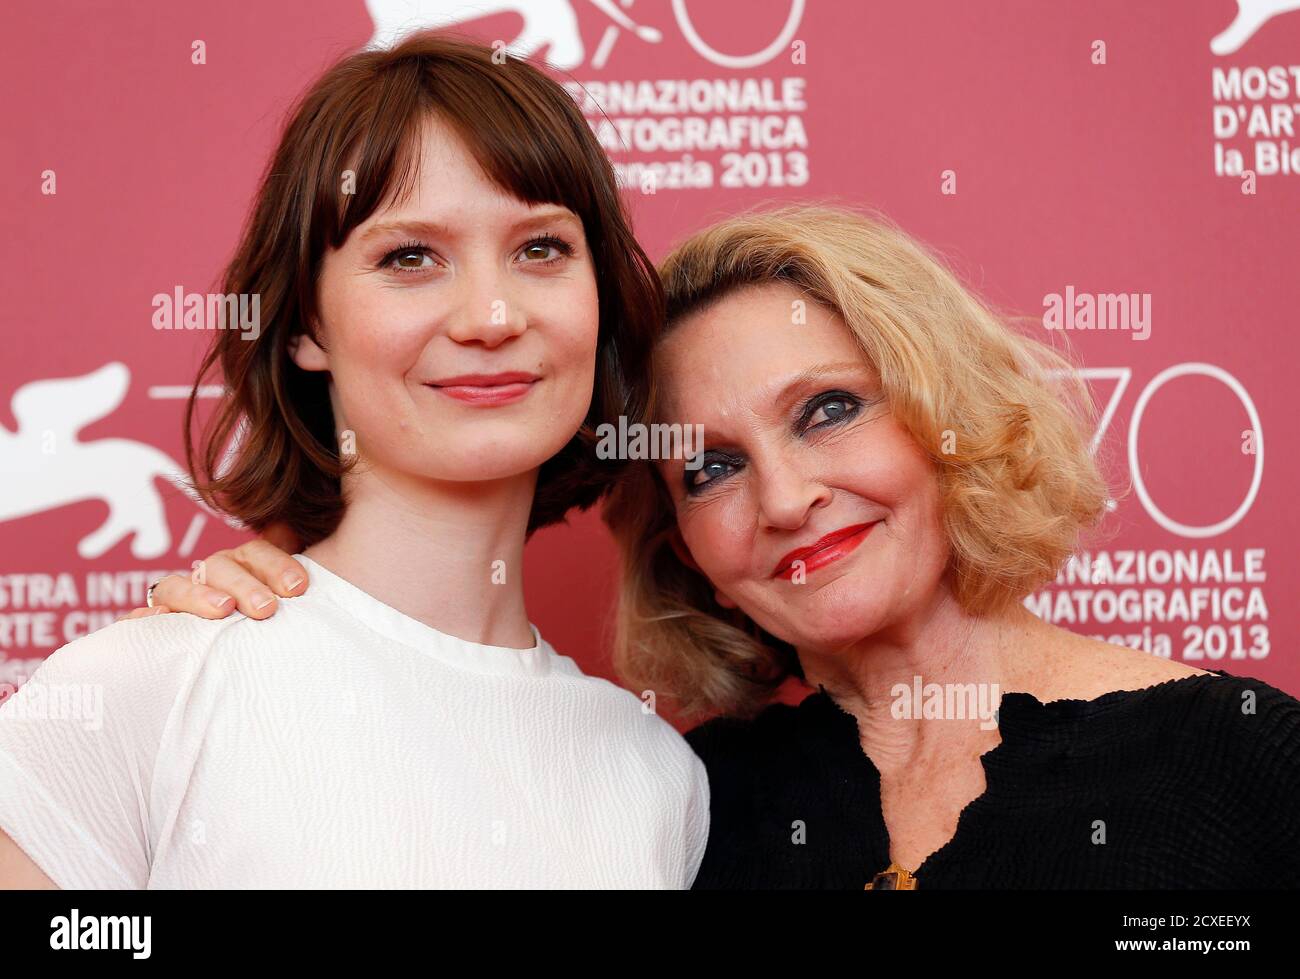 Actress Mia Wasikowska (L) and author of novel Australian Robyn Davidson (R) pose during a photocall during the 70th Venice Festival in Venice August 29, 2013. Wasikowska star